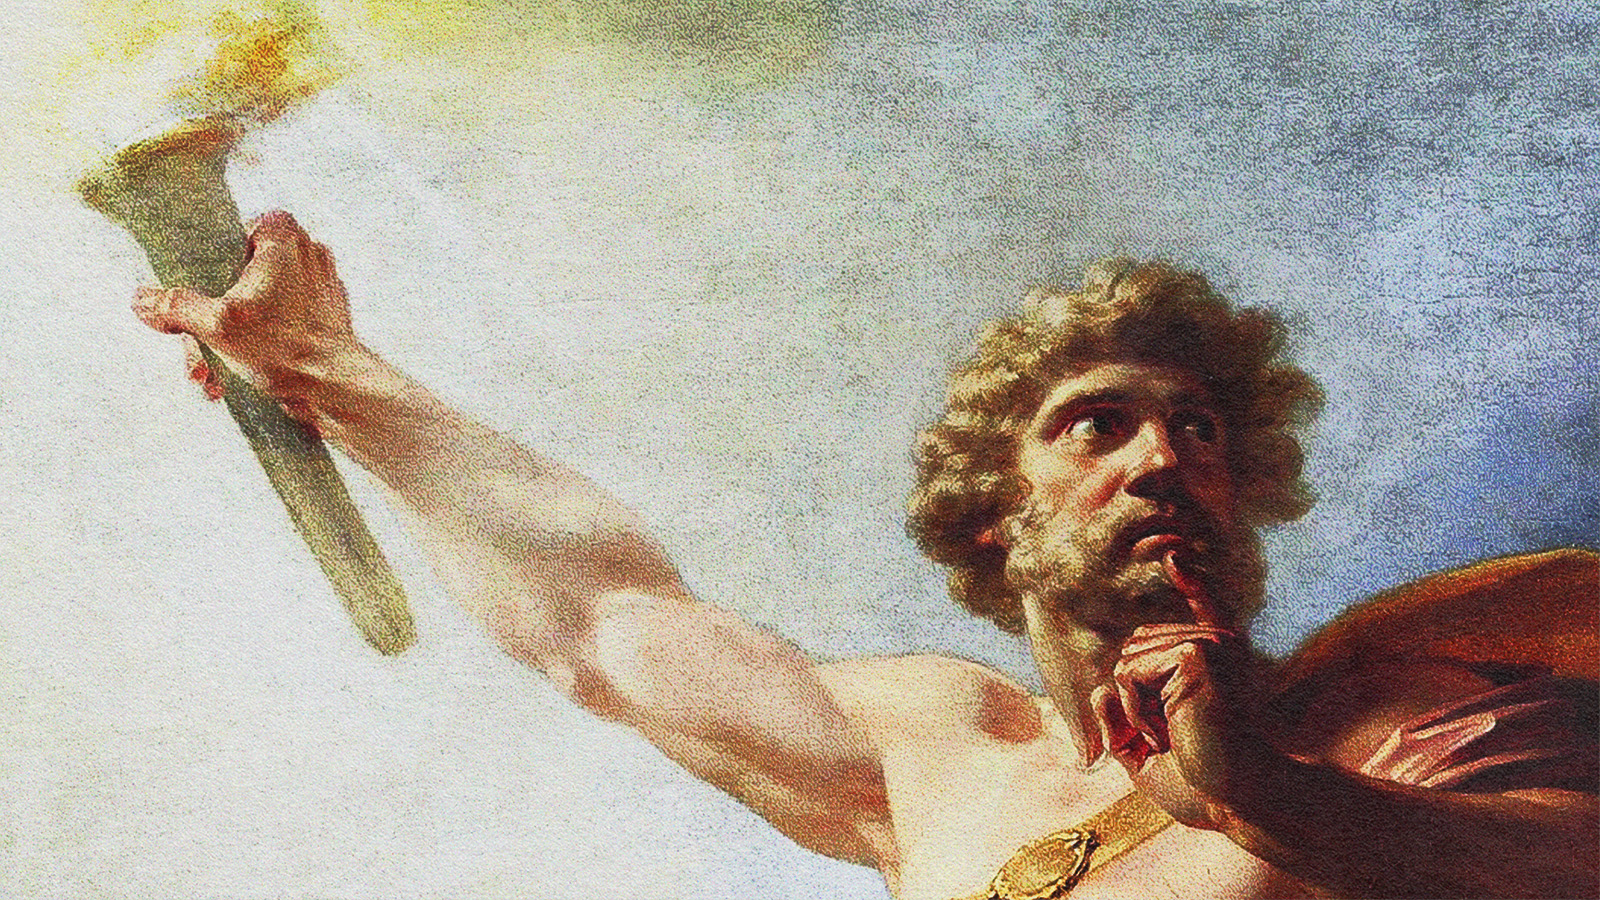 Painting of Prometheus holding a flaming torch aloft.